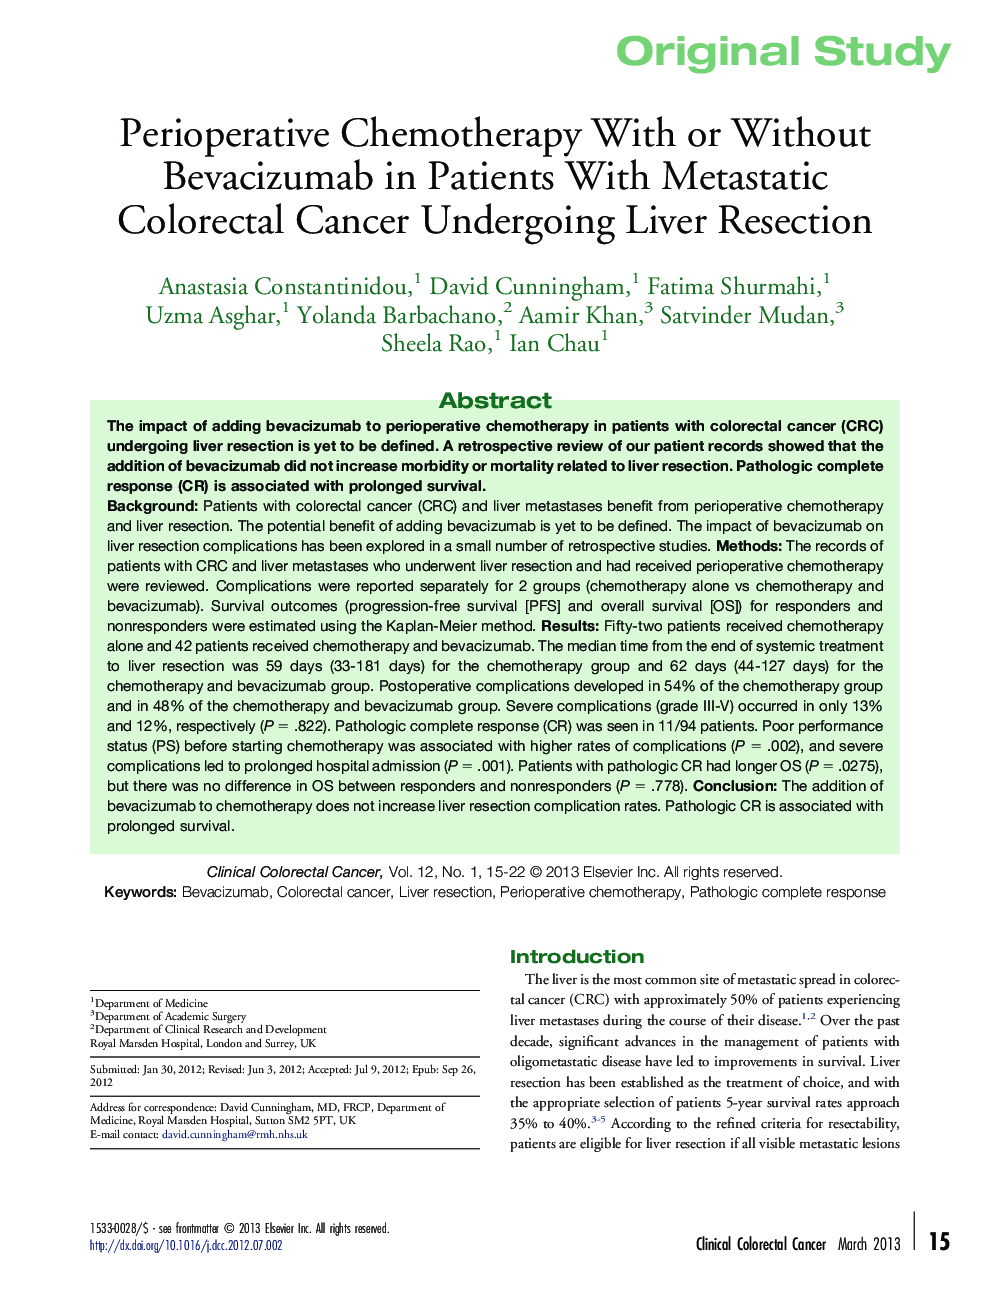 Perioperative Chemotherapy With or Without Bevacizumab in Patients With Metastatic Colorectal Cancer Undergoing Liver Resection